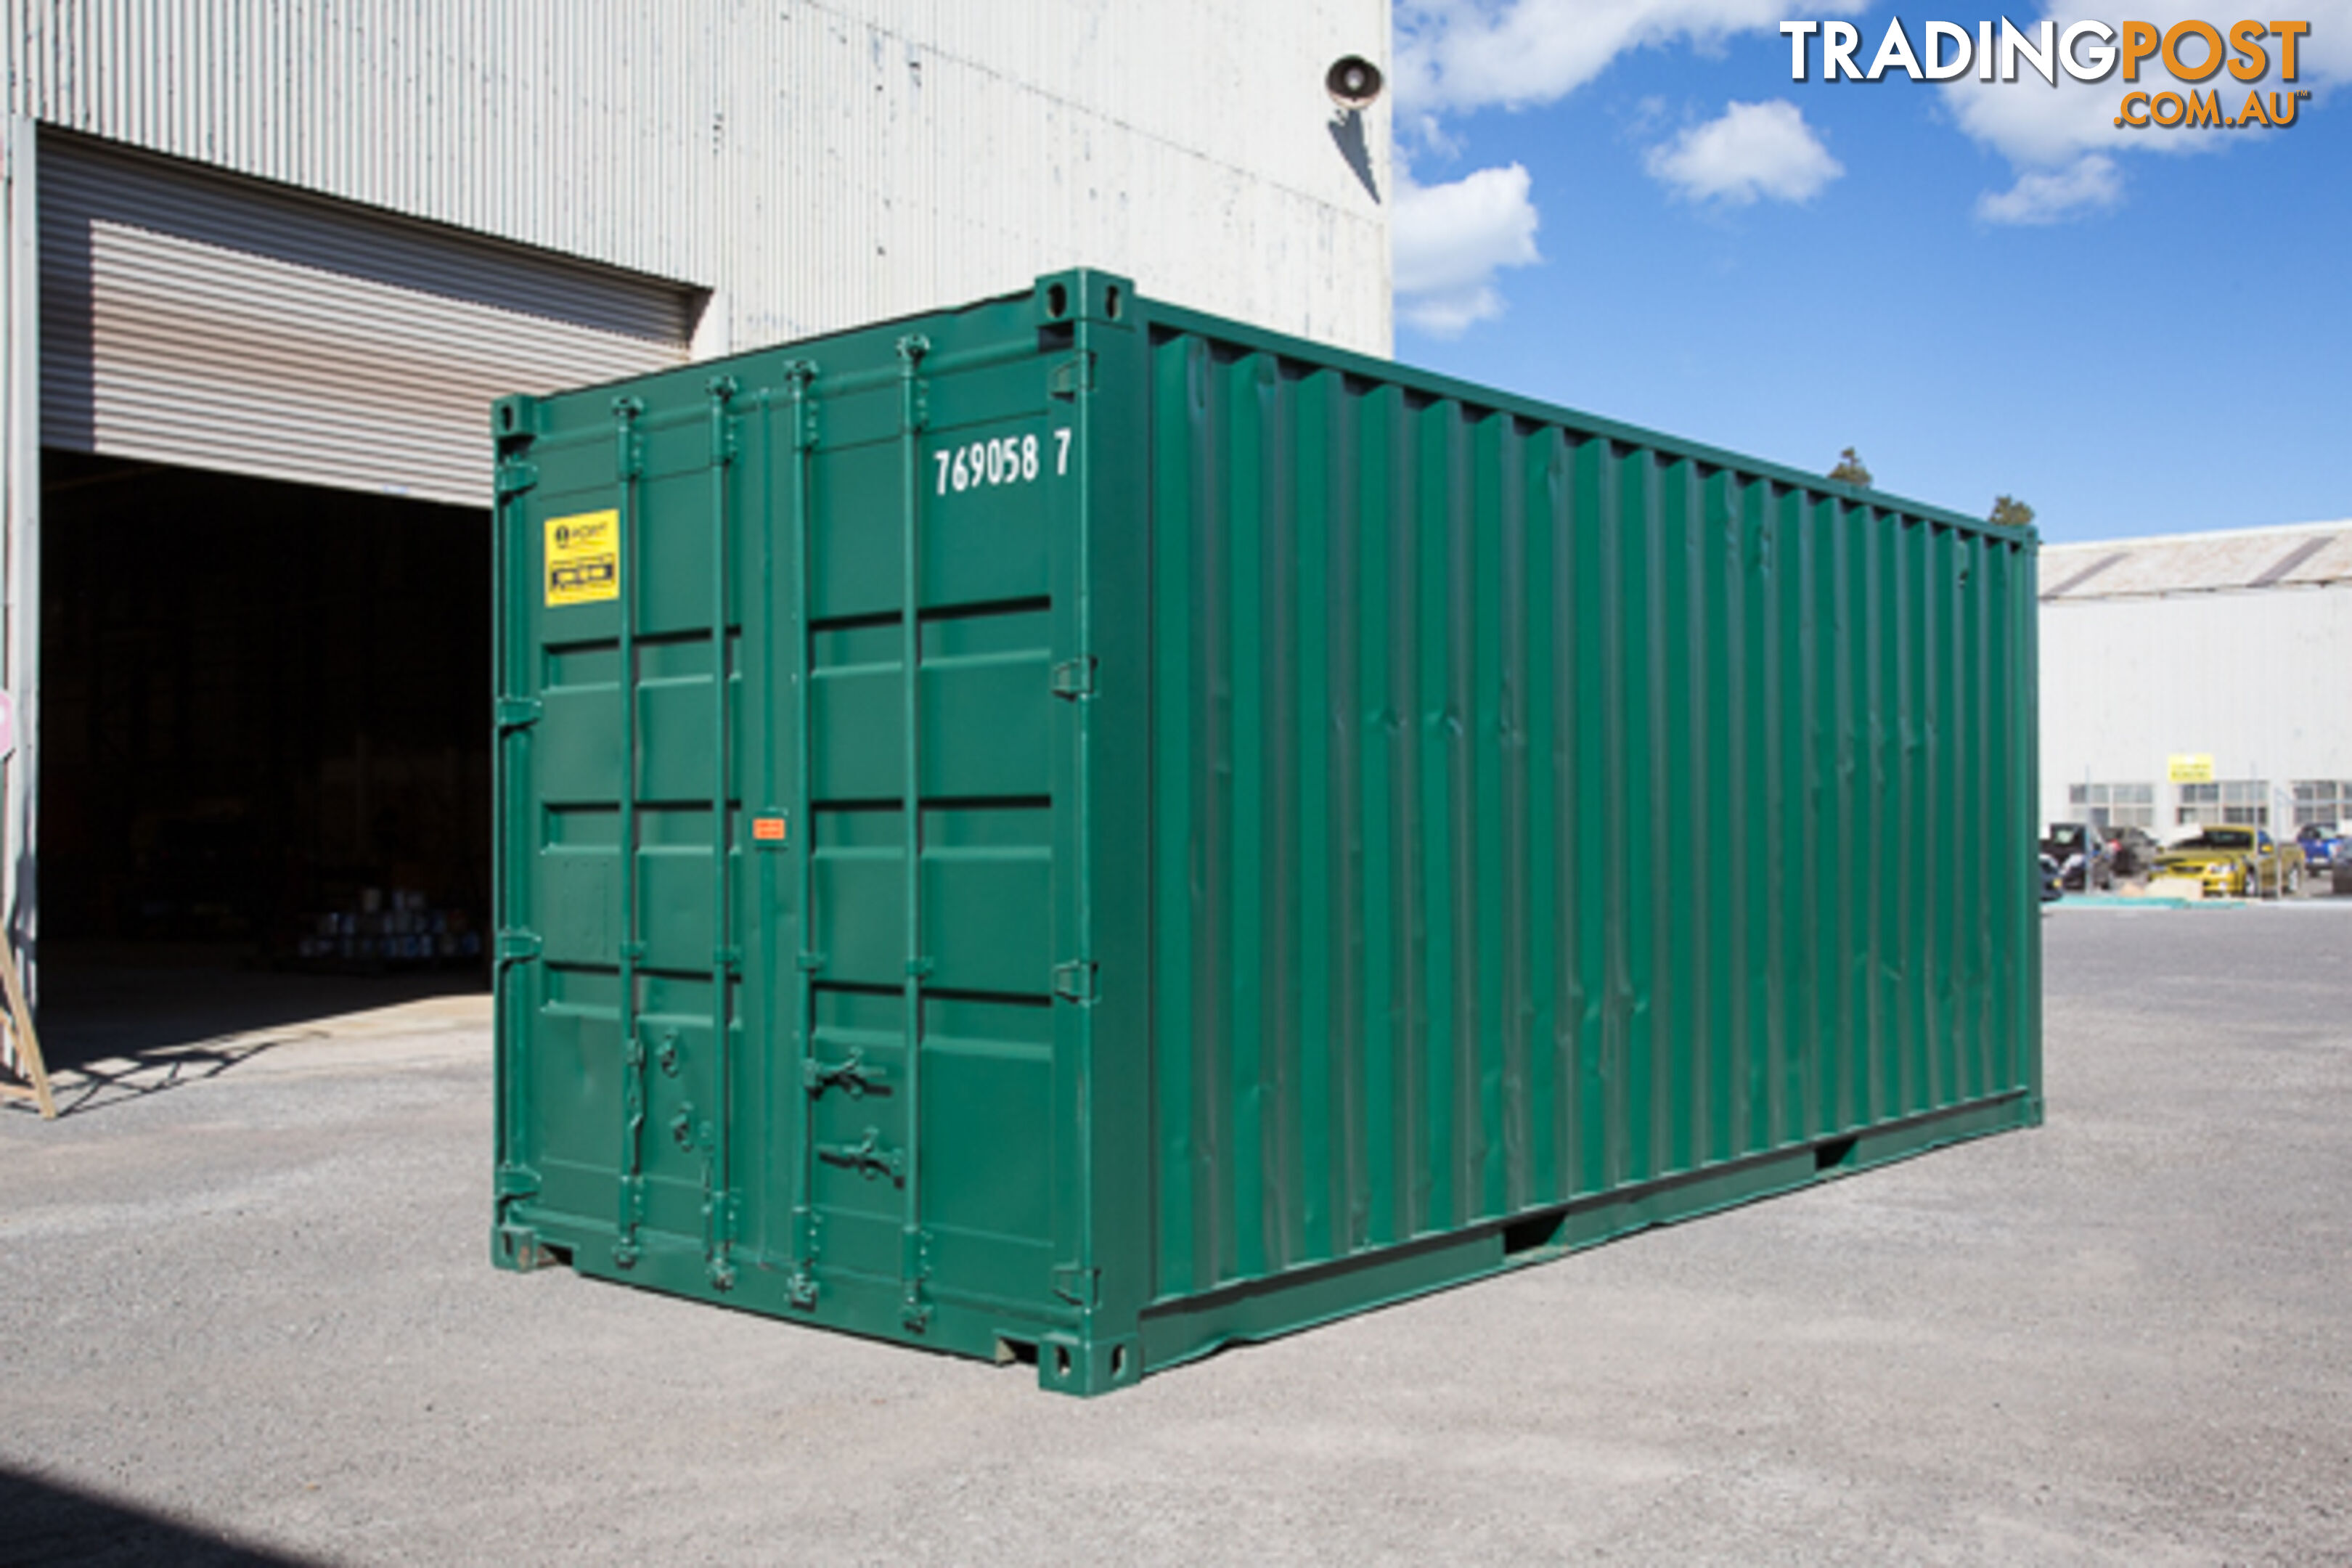 Refurbished Painted 20ft Shipping Containers Williamtown - From $4350 + GST